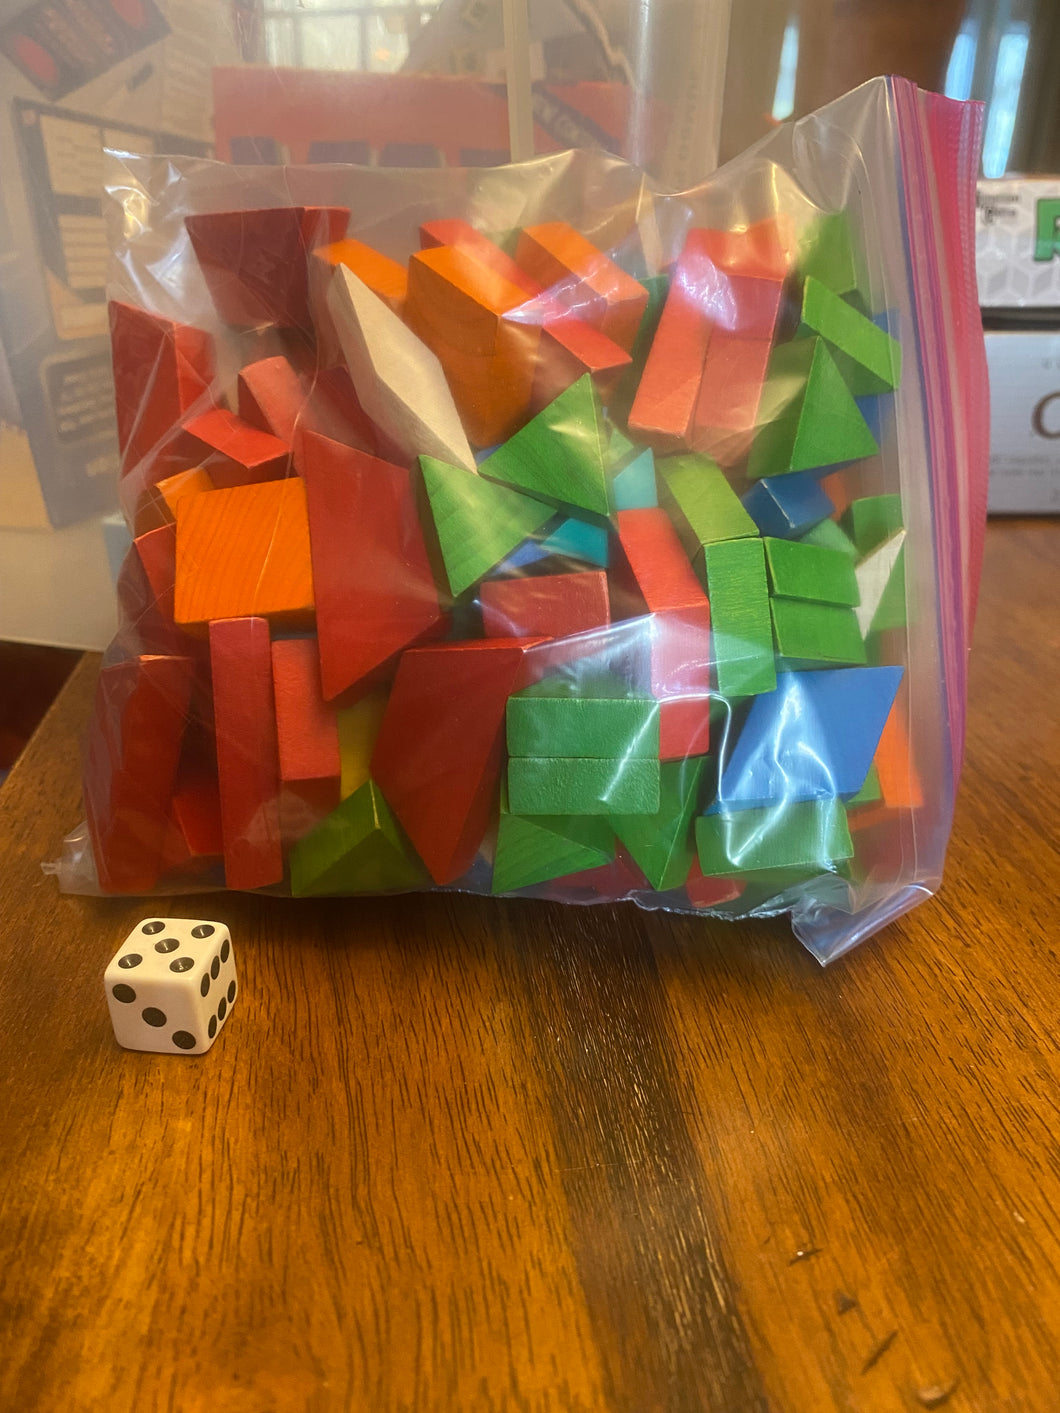 Bag of small building blocks(die shows size)